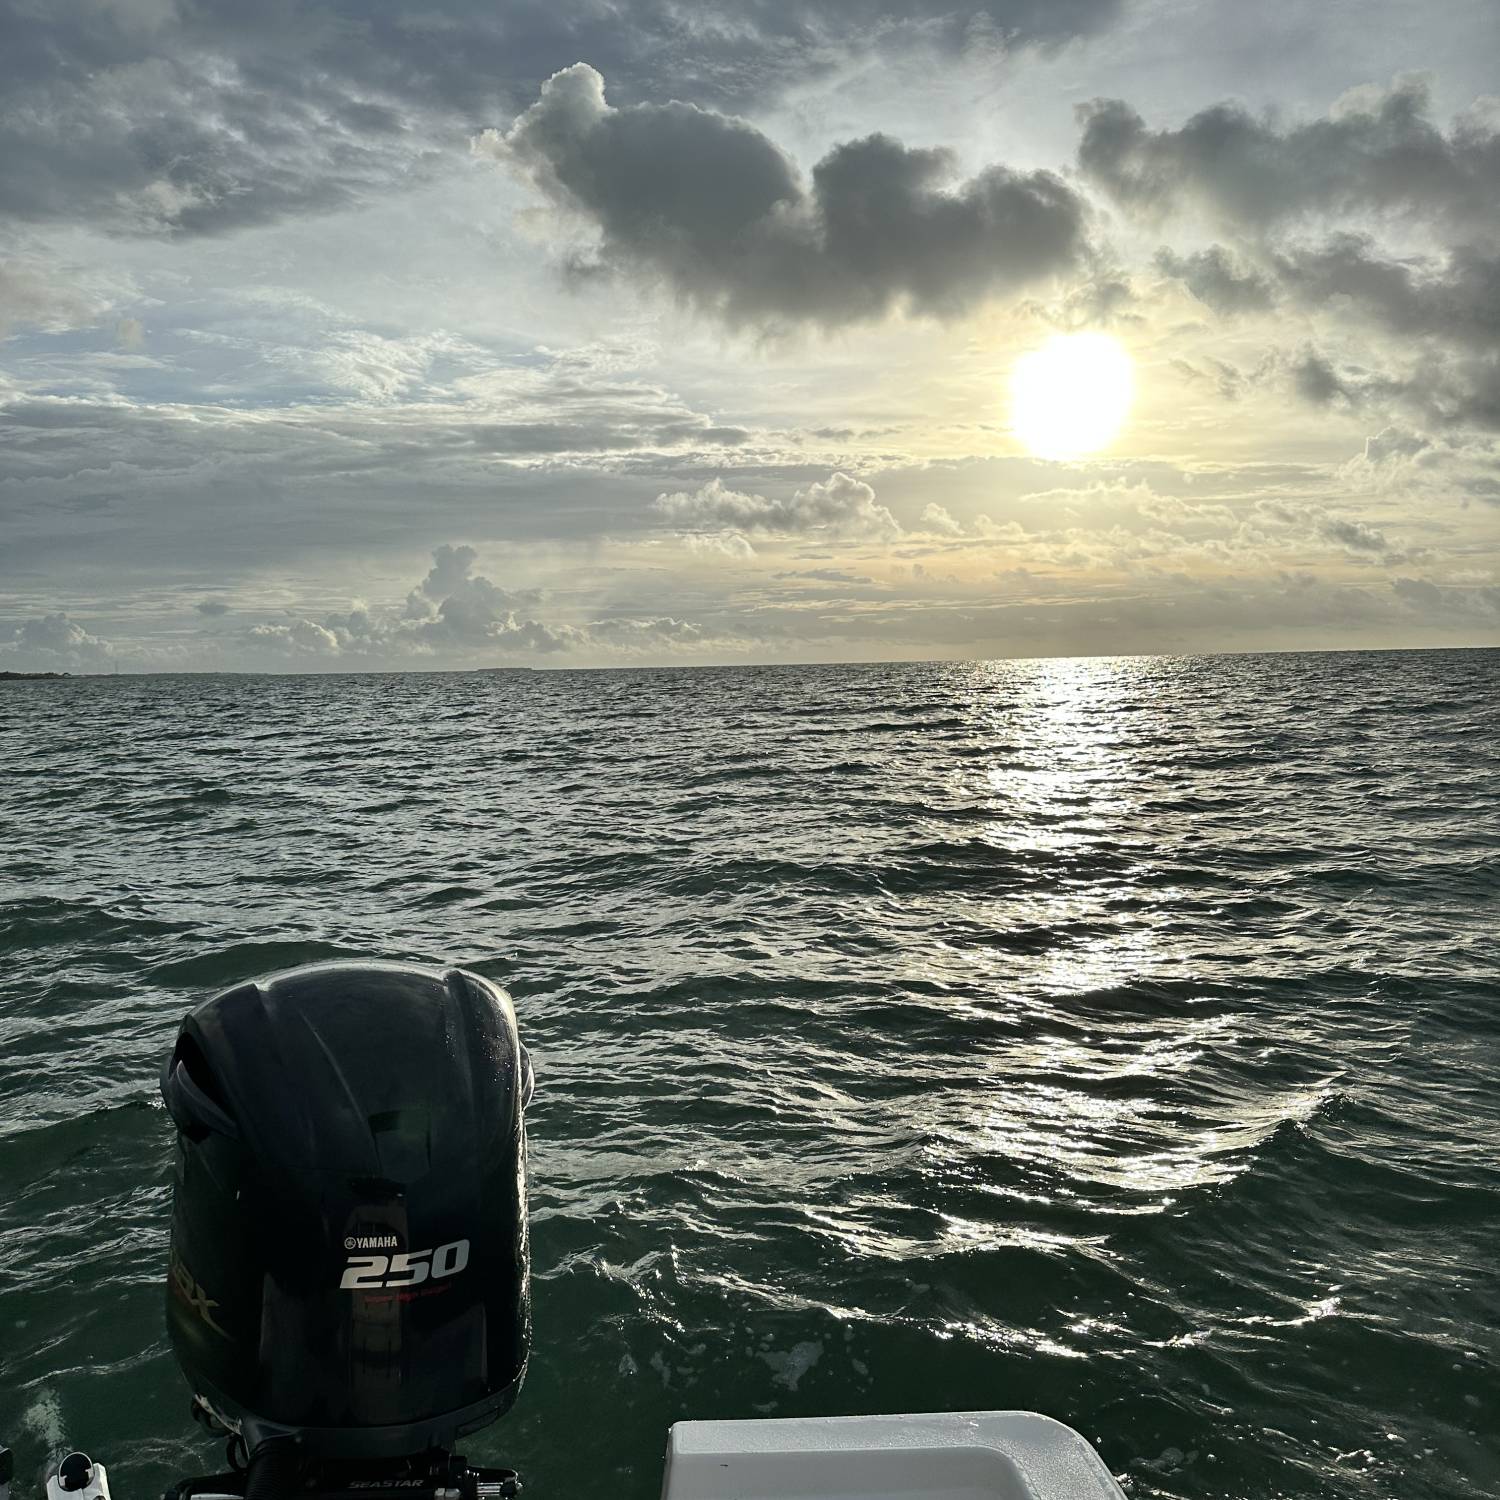 Title: Sunrise on our Lobster Spot - On board their Sportsman Masters 247 Bay Boat - Location: Islamorada, Florida. Participating in the Photo Contest #SportsmanAugust2023